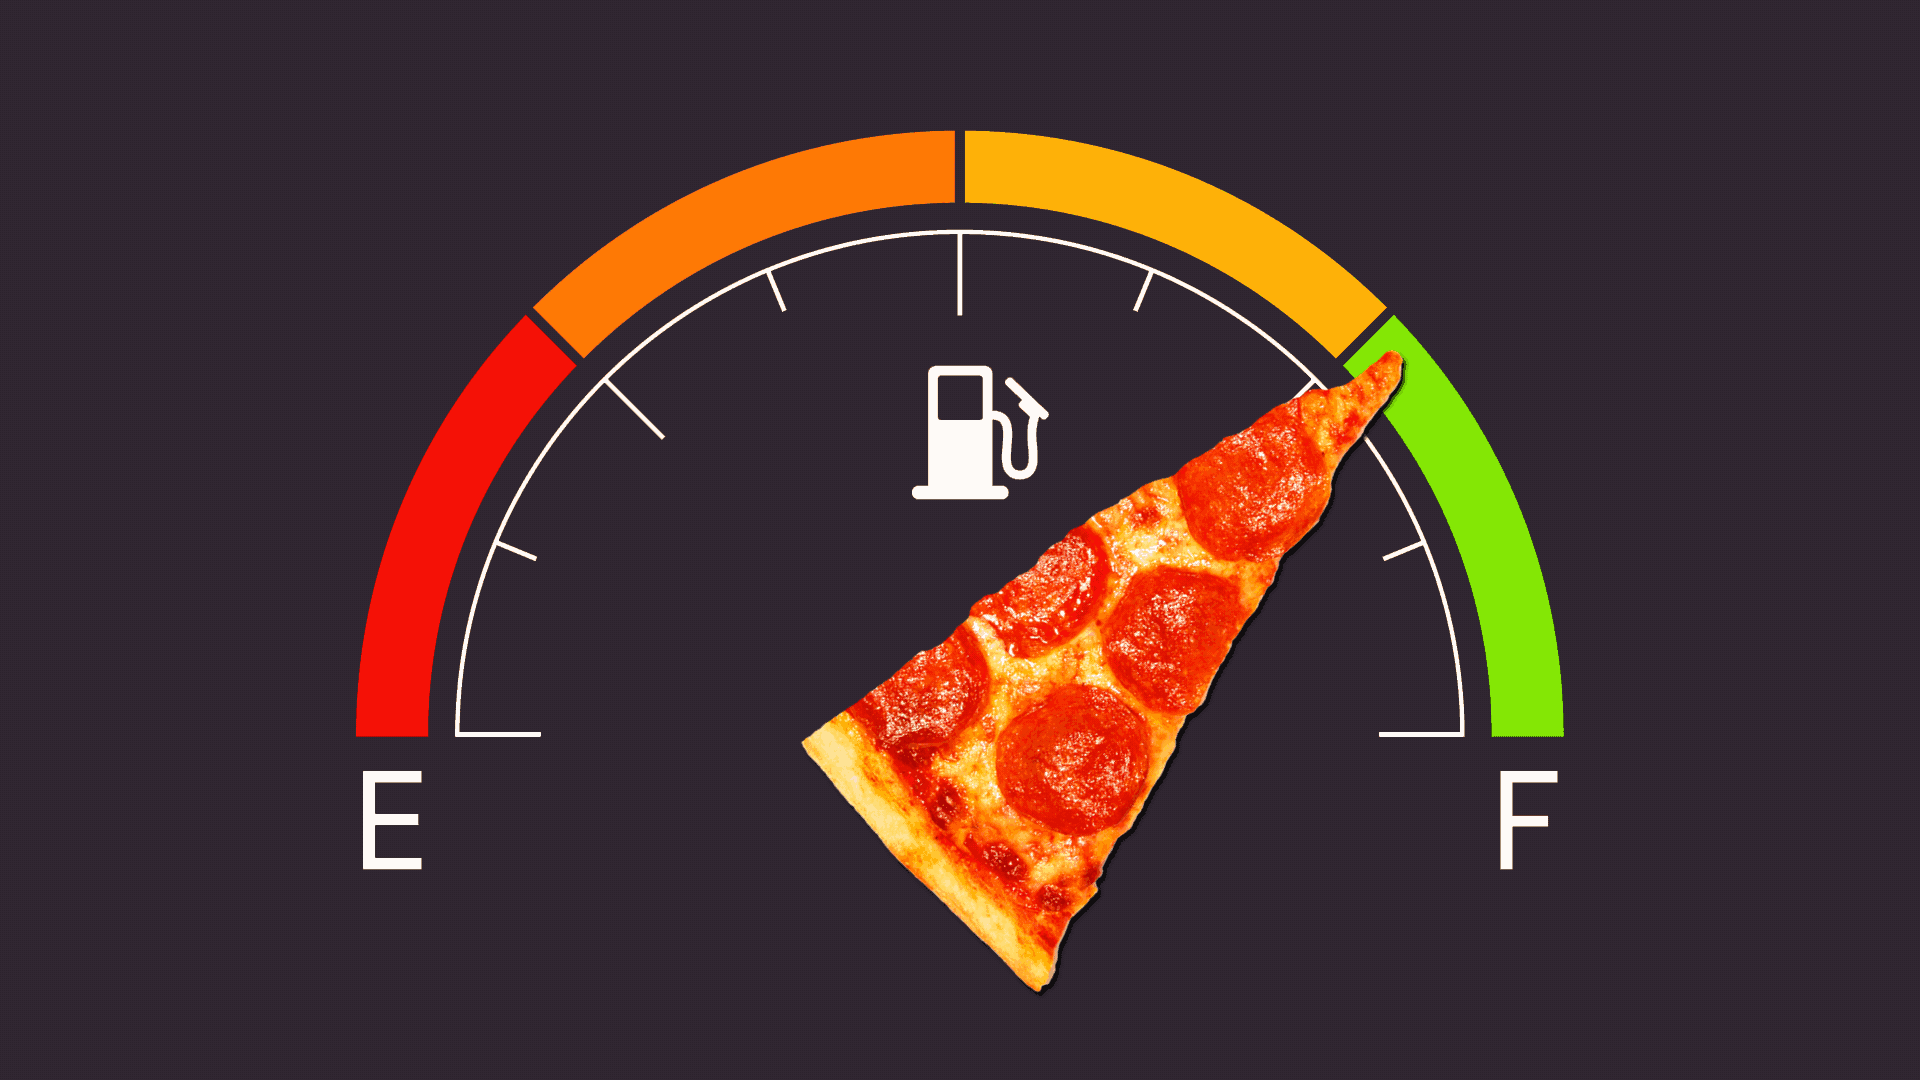 Illustration of a car's gas guage with a slice of pizza instead of a needle. 